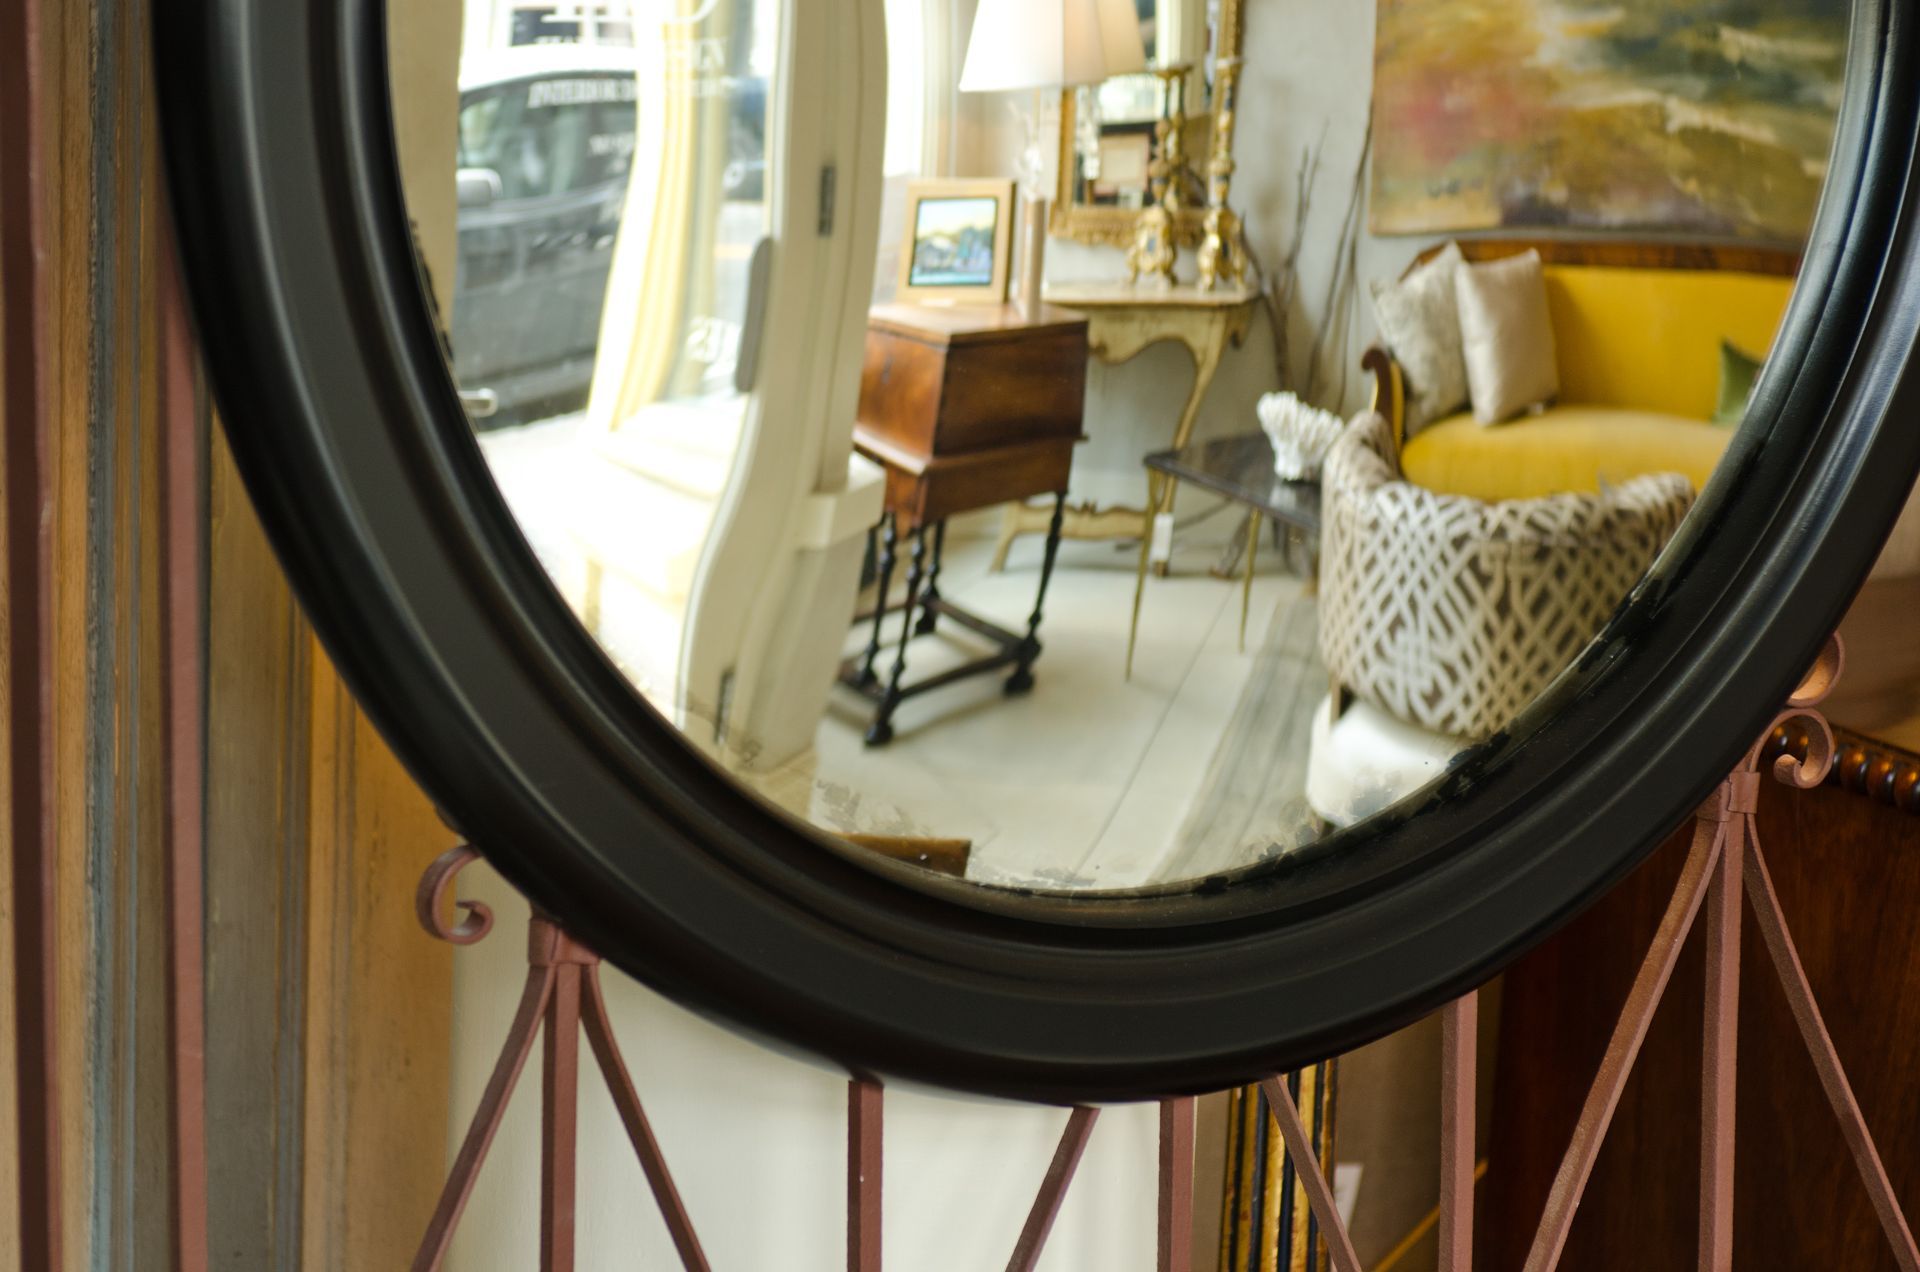 A reflection in a framed antique mirror